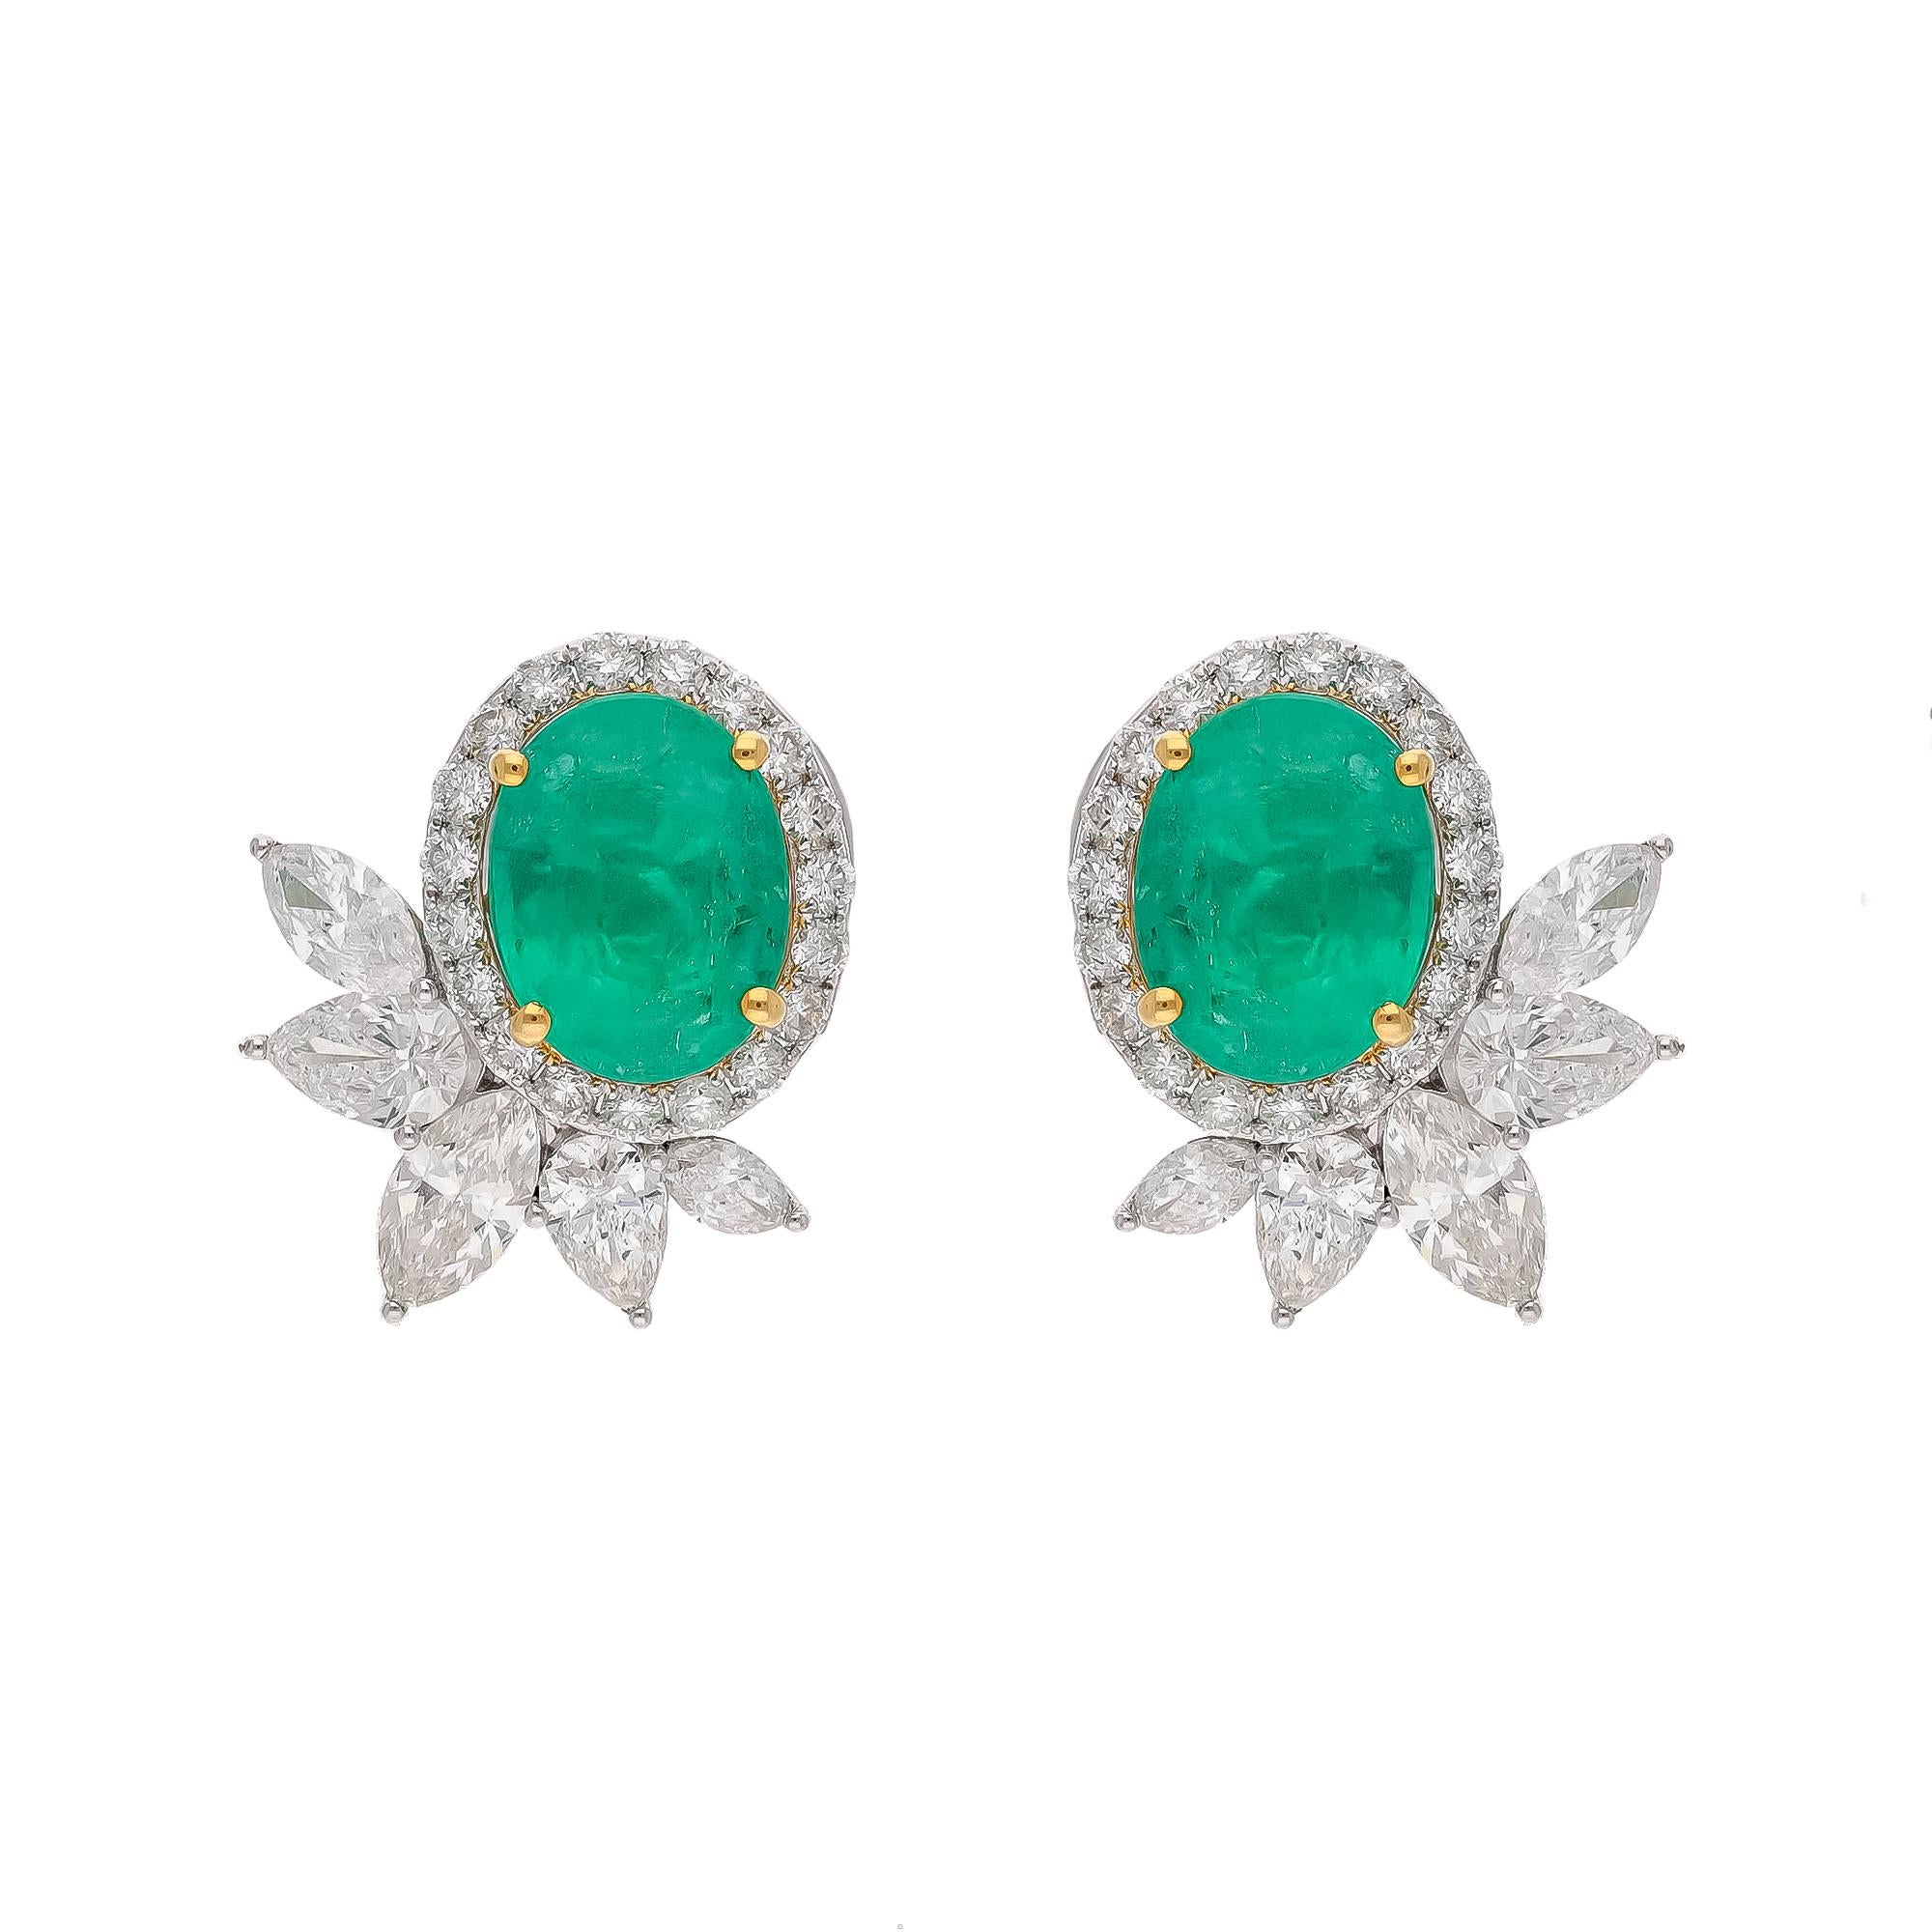 This is a natural Zambian Emerald earring with diamonds and 18k gold. The emeralds are very high quality and very good quality diamonds the clarity is vsi and G colour


Emeralds : 2.53 carats
diamonds : 2.19 carats
gold : 5.196 gms

This is a Brand